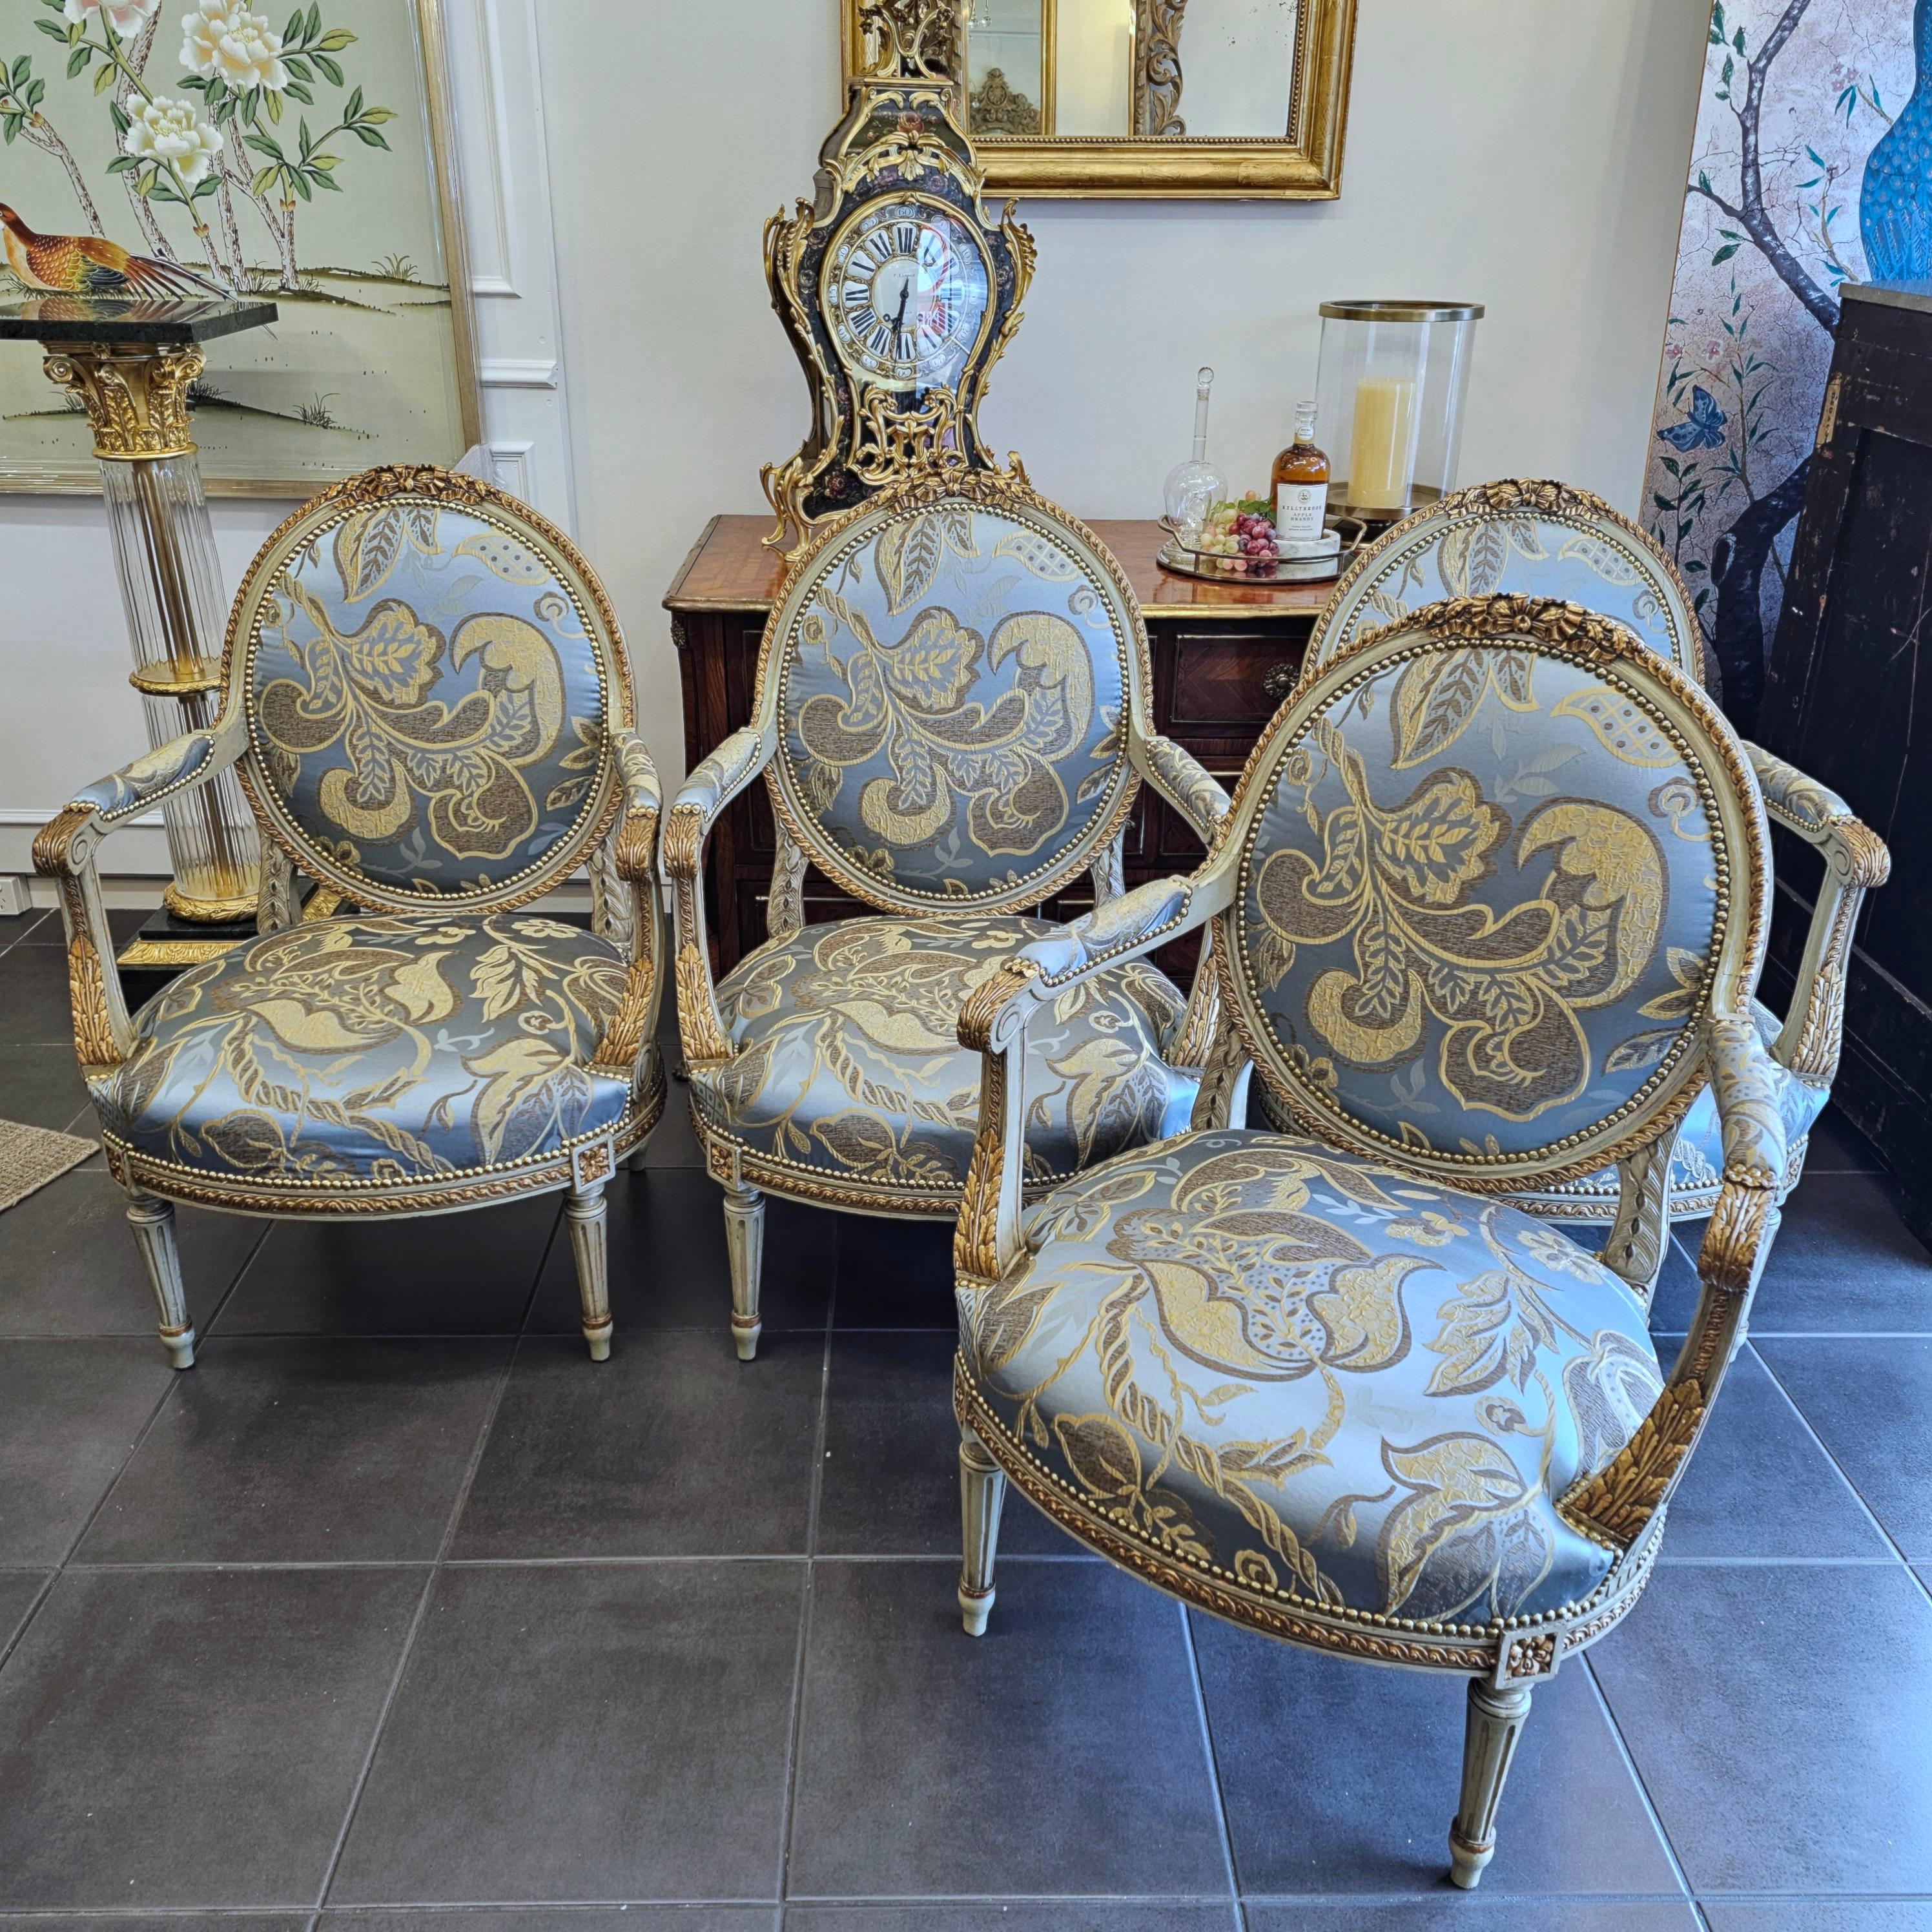 Set of Four Louis XVI Style Painted and Giltwood Fauteuils

A set of four (4) Louis XVI Style Medallion “en cabriolet” that are perfectly proportioned, comfortable and exceptionally elegant.

Painted in soft french green/grey with gilt accents,